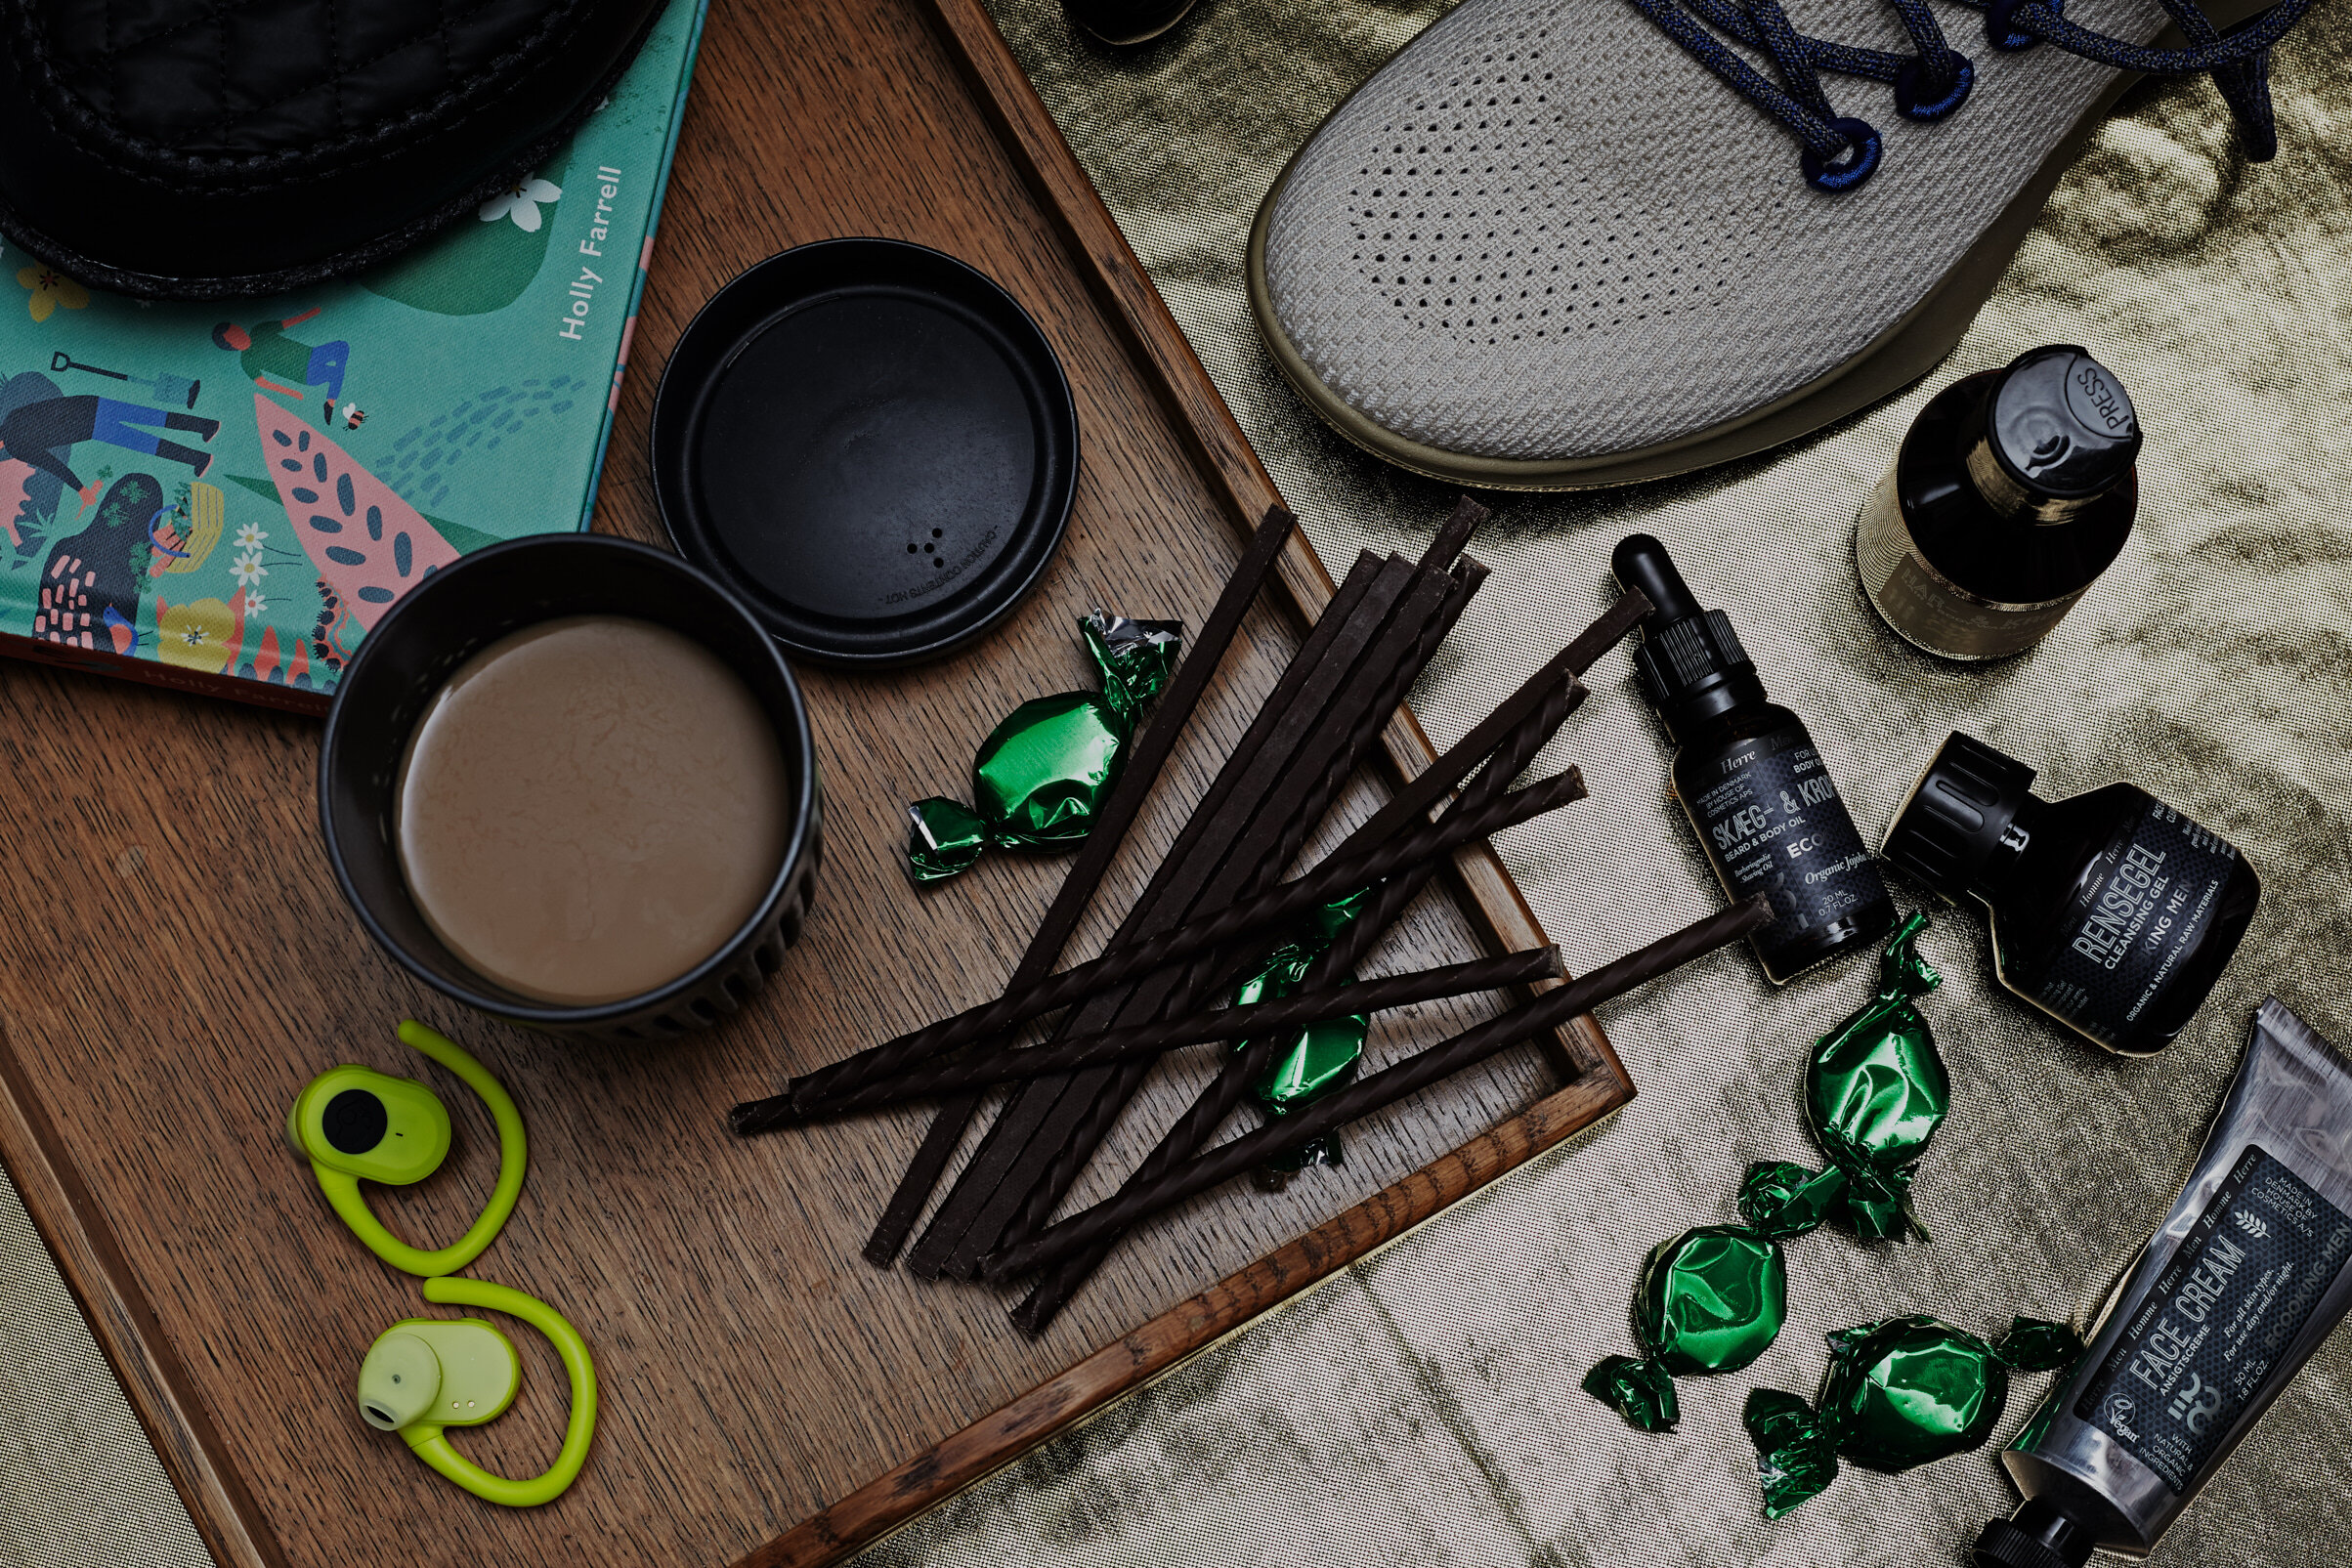  SKULL CANDY  Push Ultra True Wireless Earbuds  £89.99   HUSKEE  8oz Reusable Cup   £14.49 @ Zero-Living   ALL BIRDS  Mens Tree Dashers  £120   ECOOKING  Starter Set  £43.50       